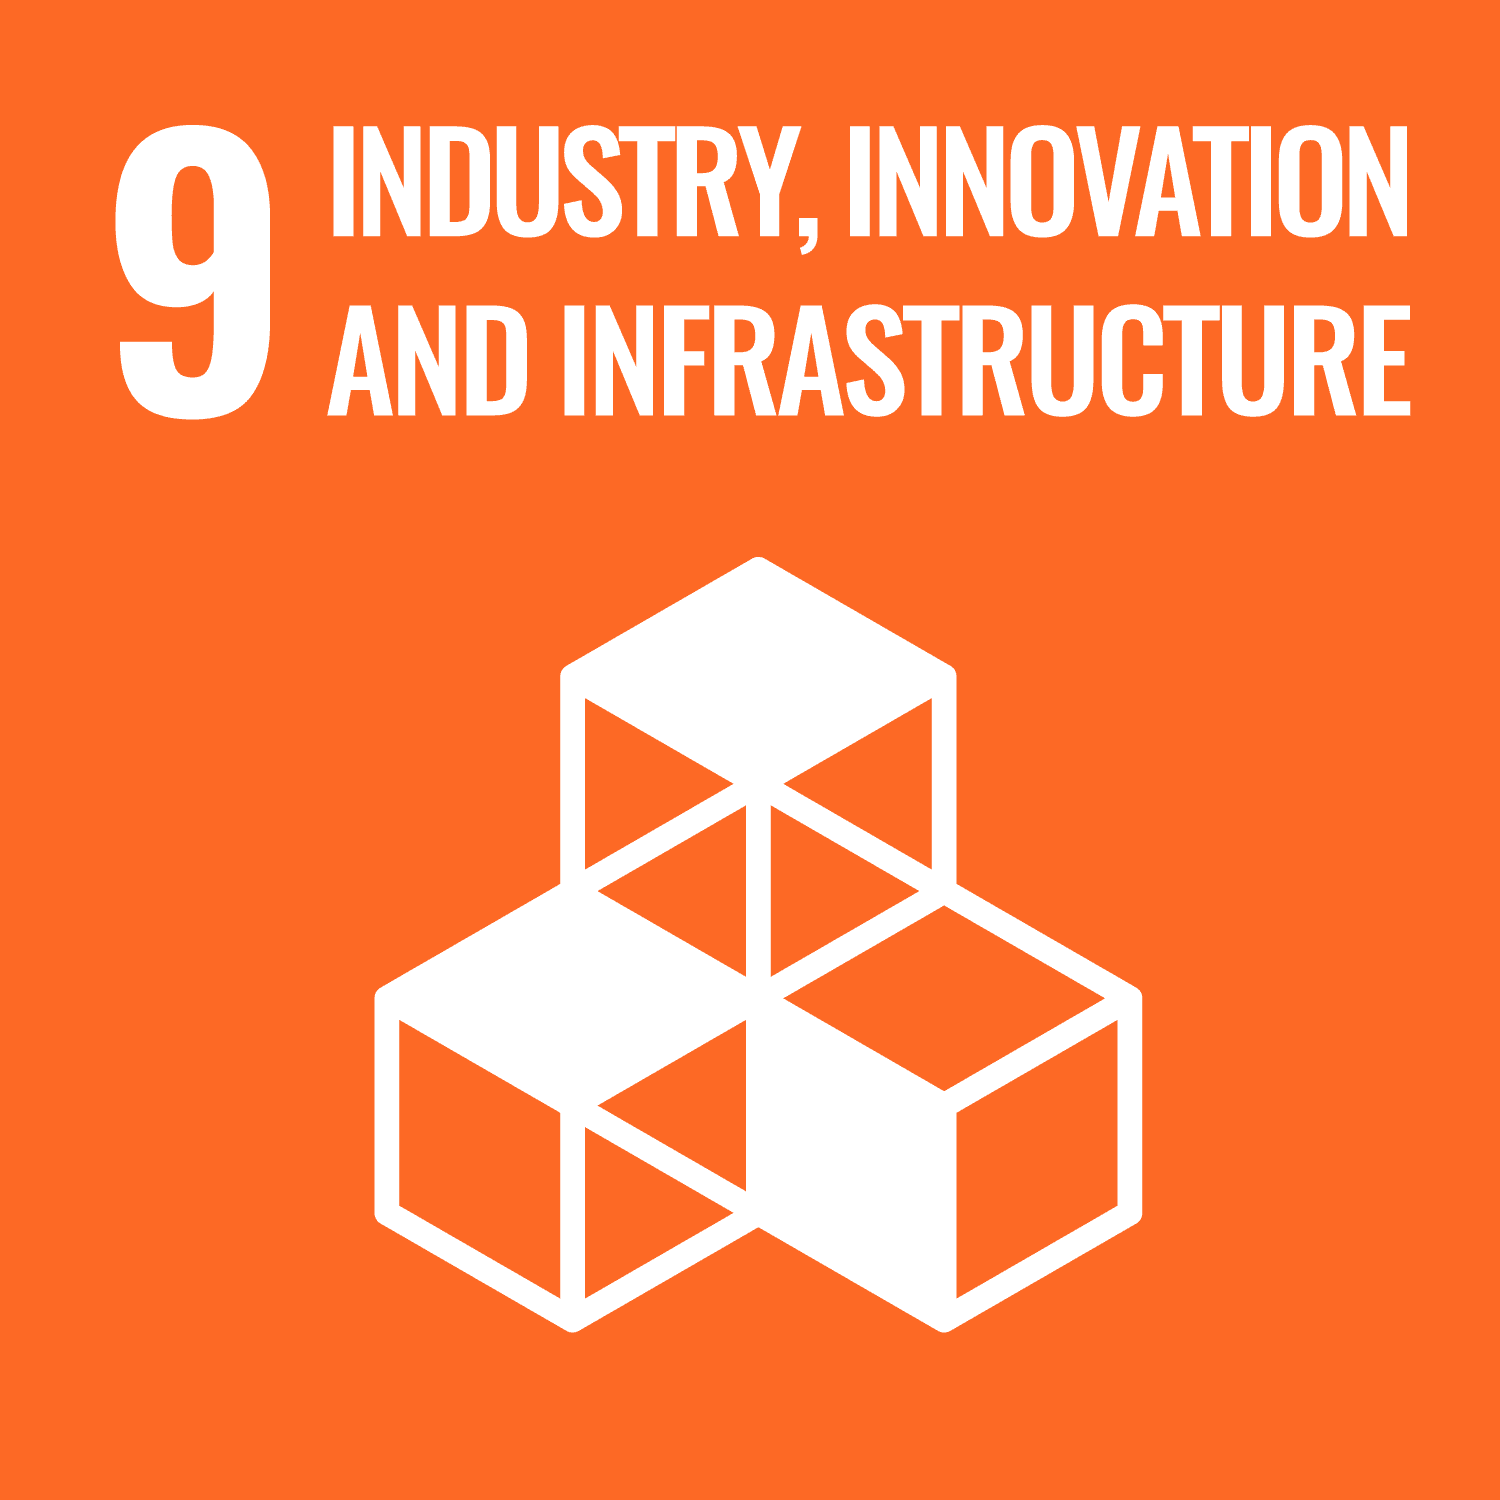 9 INDUSTRIES, INNOVATION AND INFRASTRUCTURE